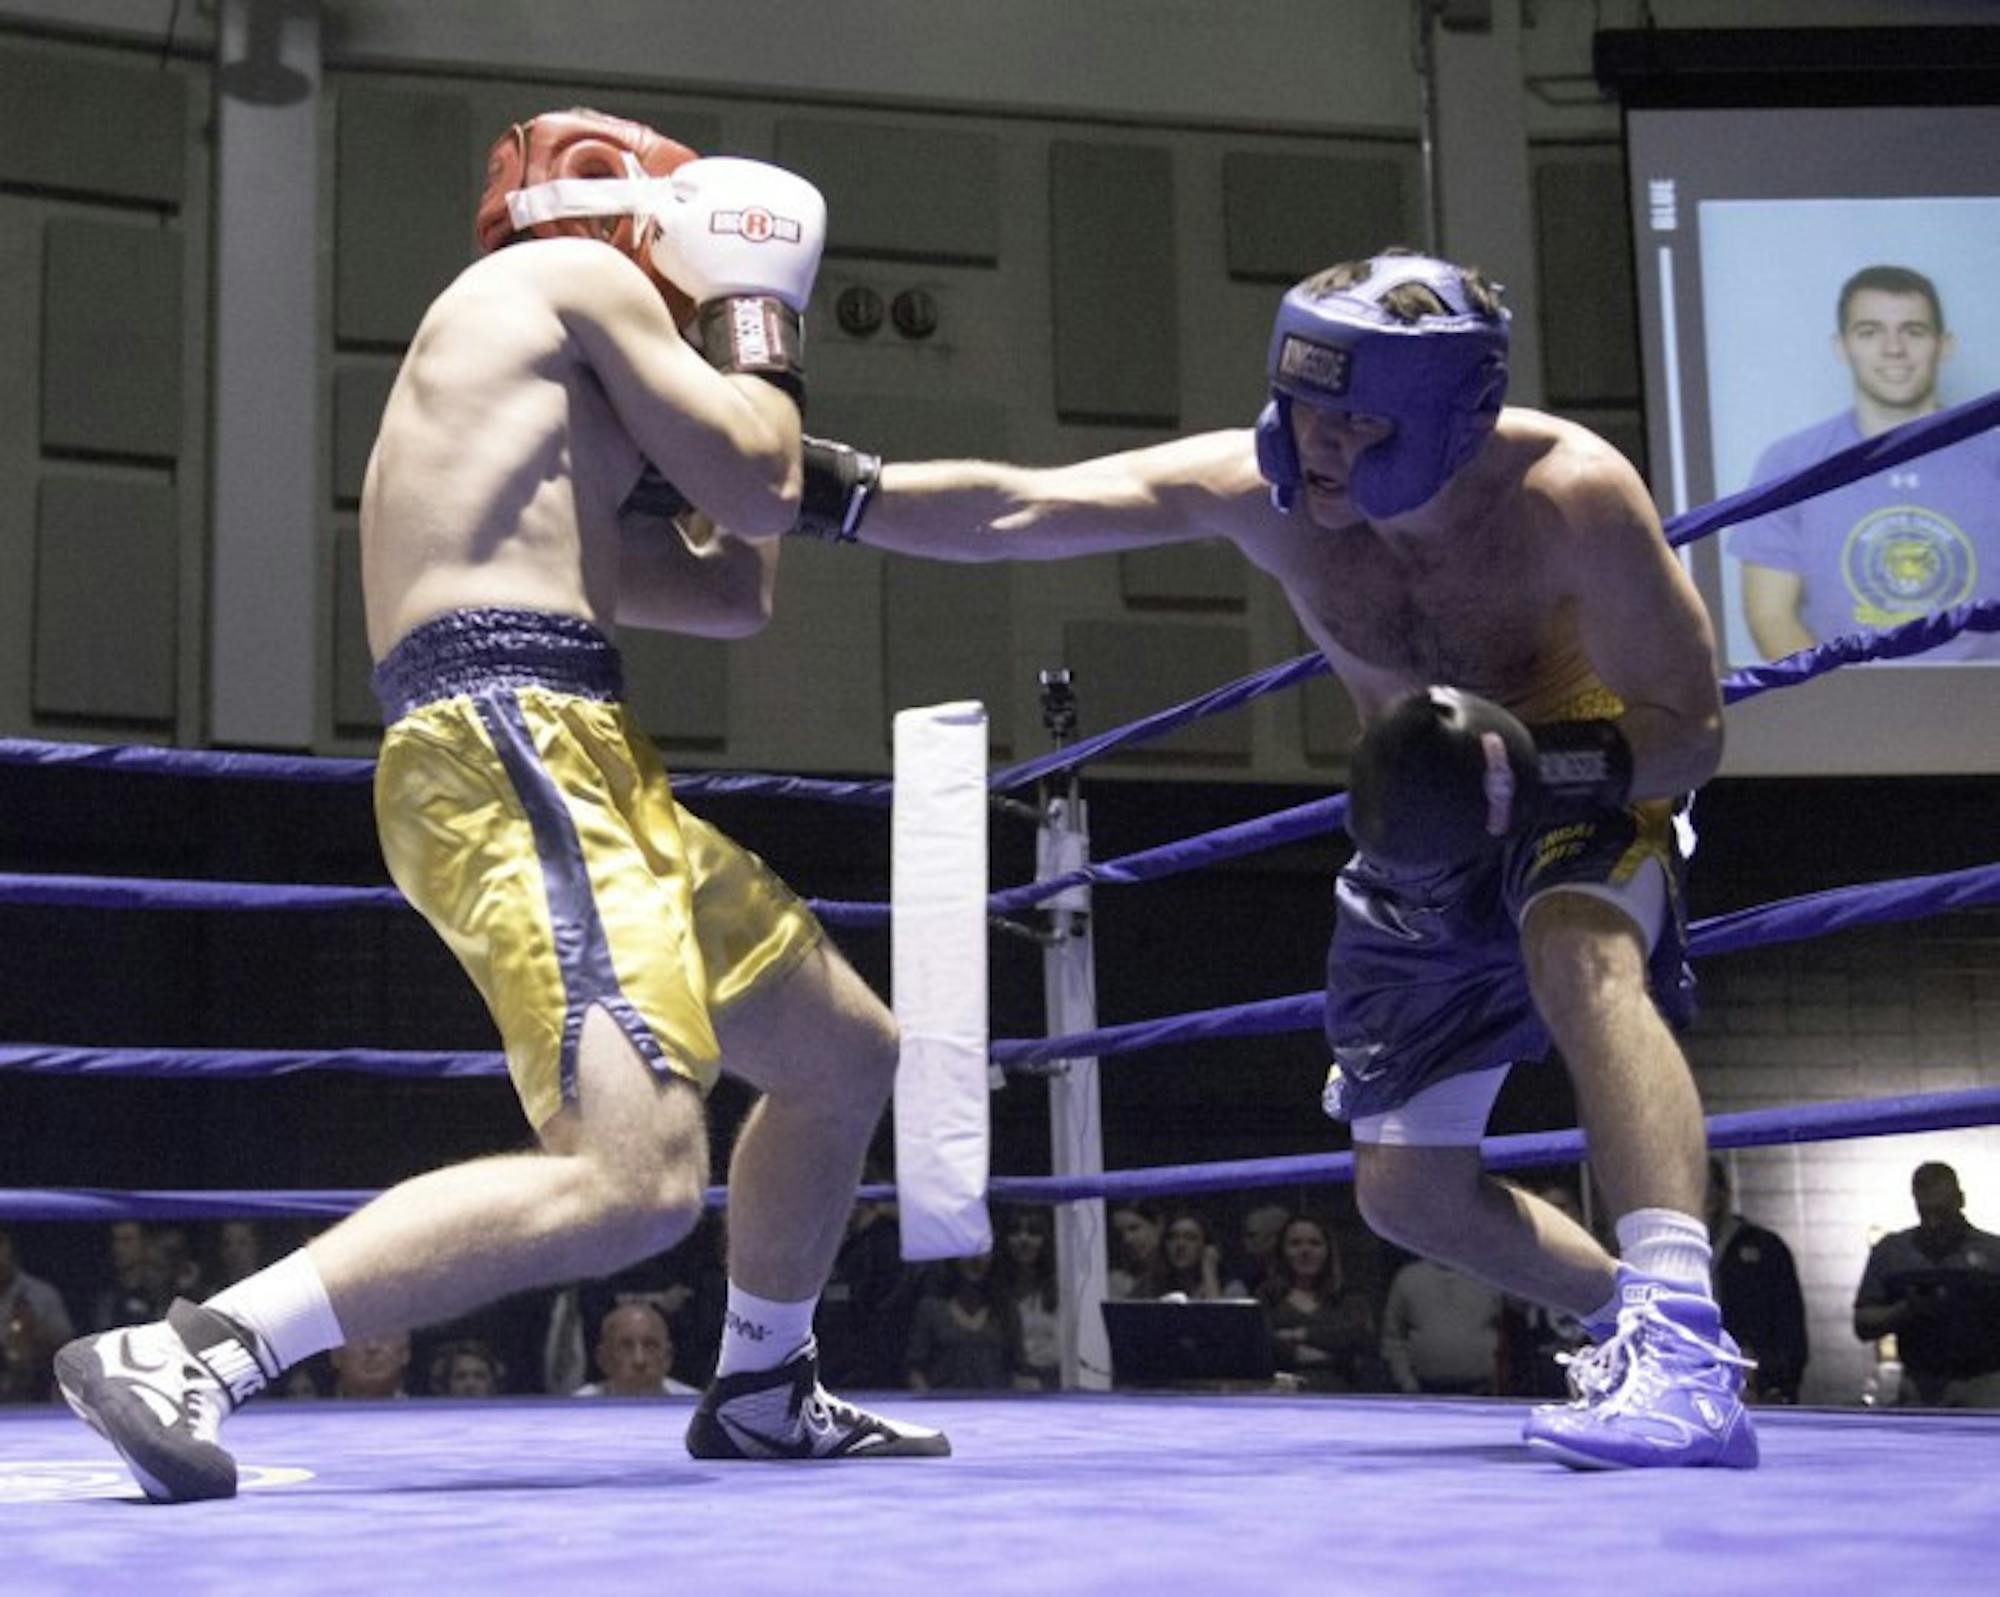 Senior captain Jack Corrigan lands a right jab to the chest of sophomore Michael Krecek during a 174-pound semifinal bout Monday at the Joyce Center Fieldhouse. Highlights of Corrigan’s four-year Bengal Bouts career include helping break the fundraising goal in 2016 and traveling to Bengladesh to witness the Holy Cross missions.